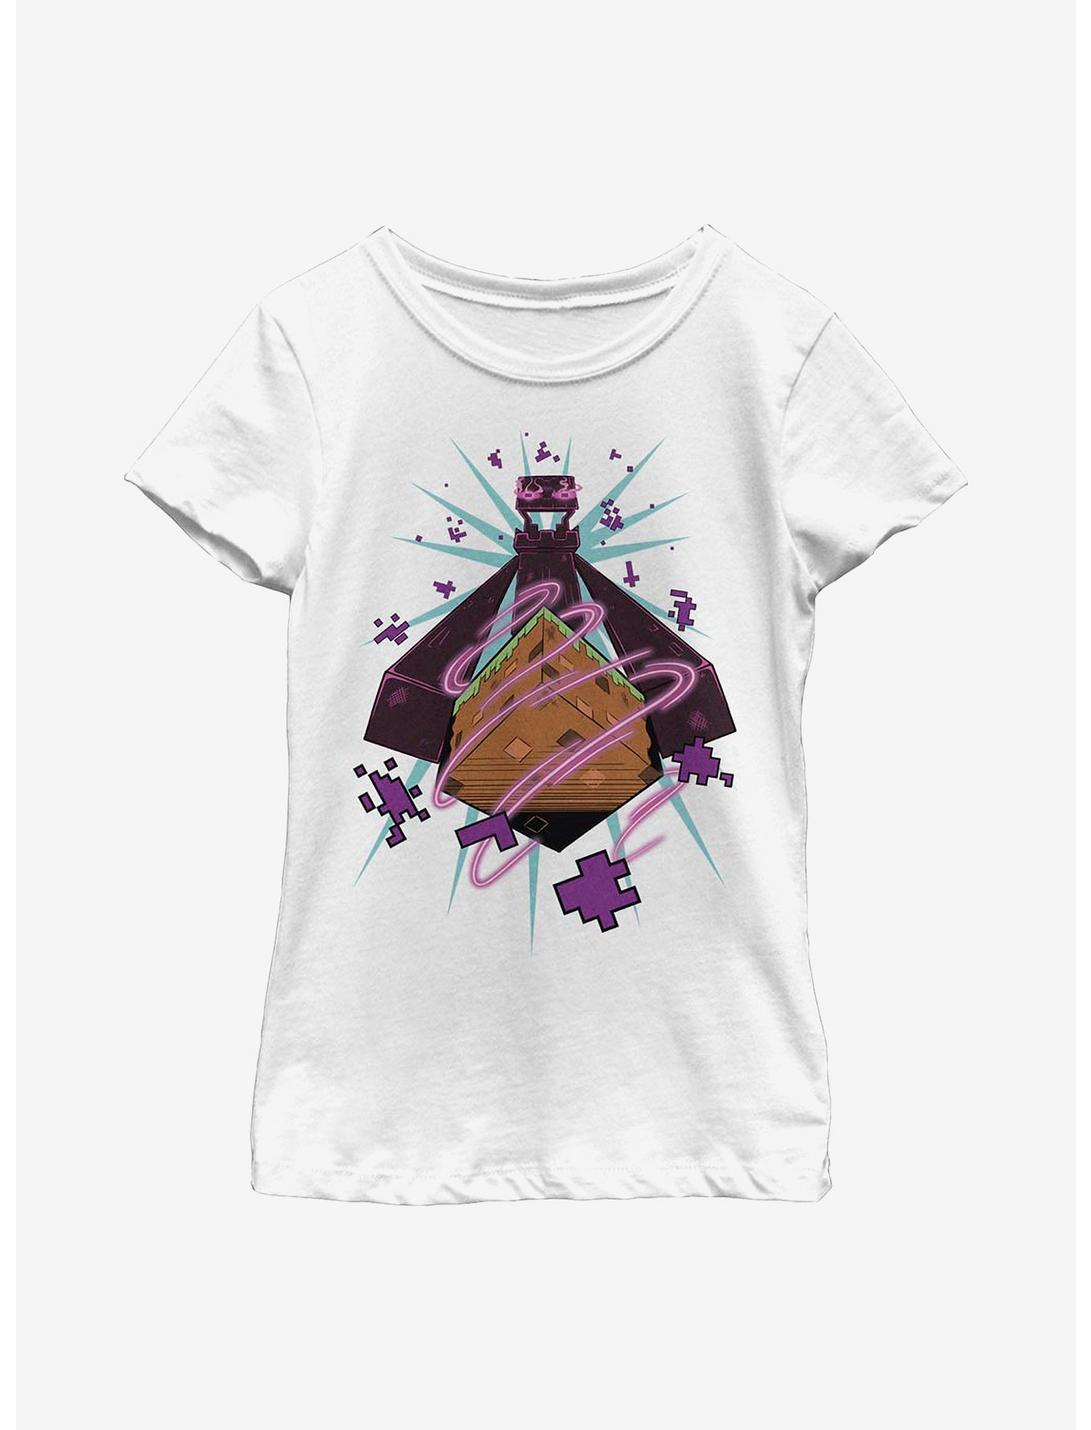 Minecraft Enderman Forced Perspective Youth Girls T-Shirt, WHITE, hi-res